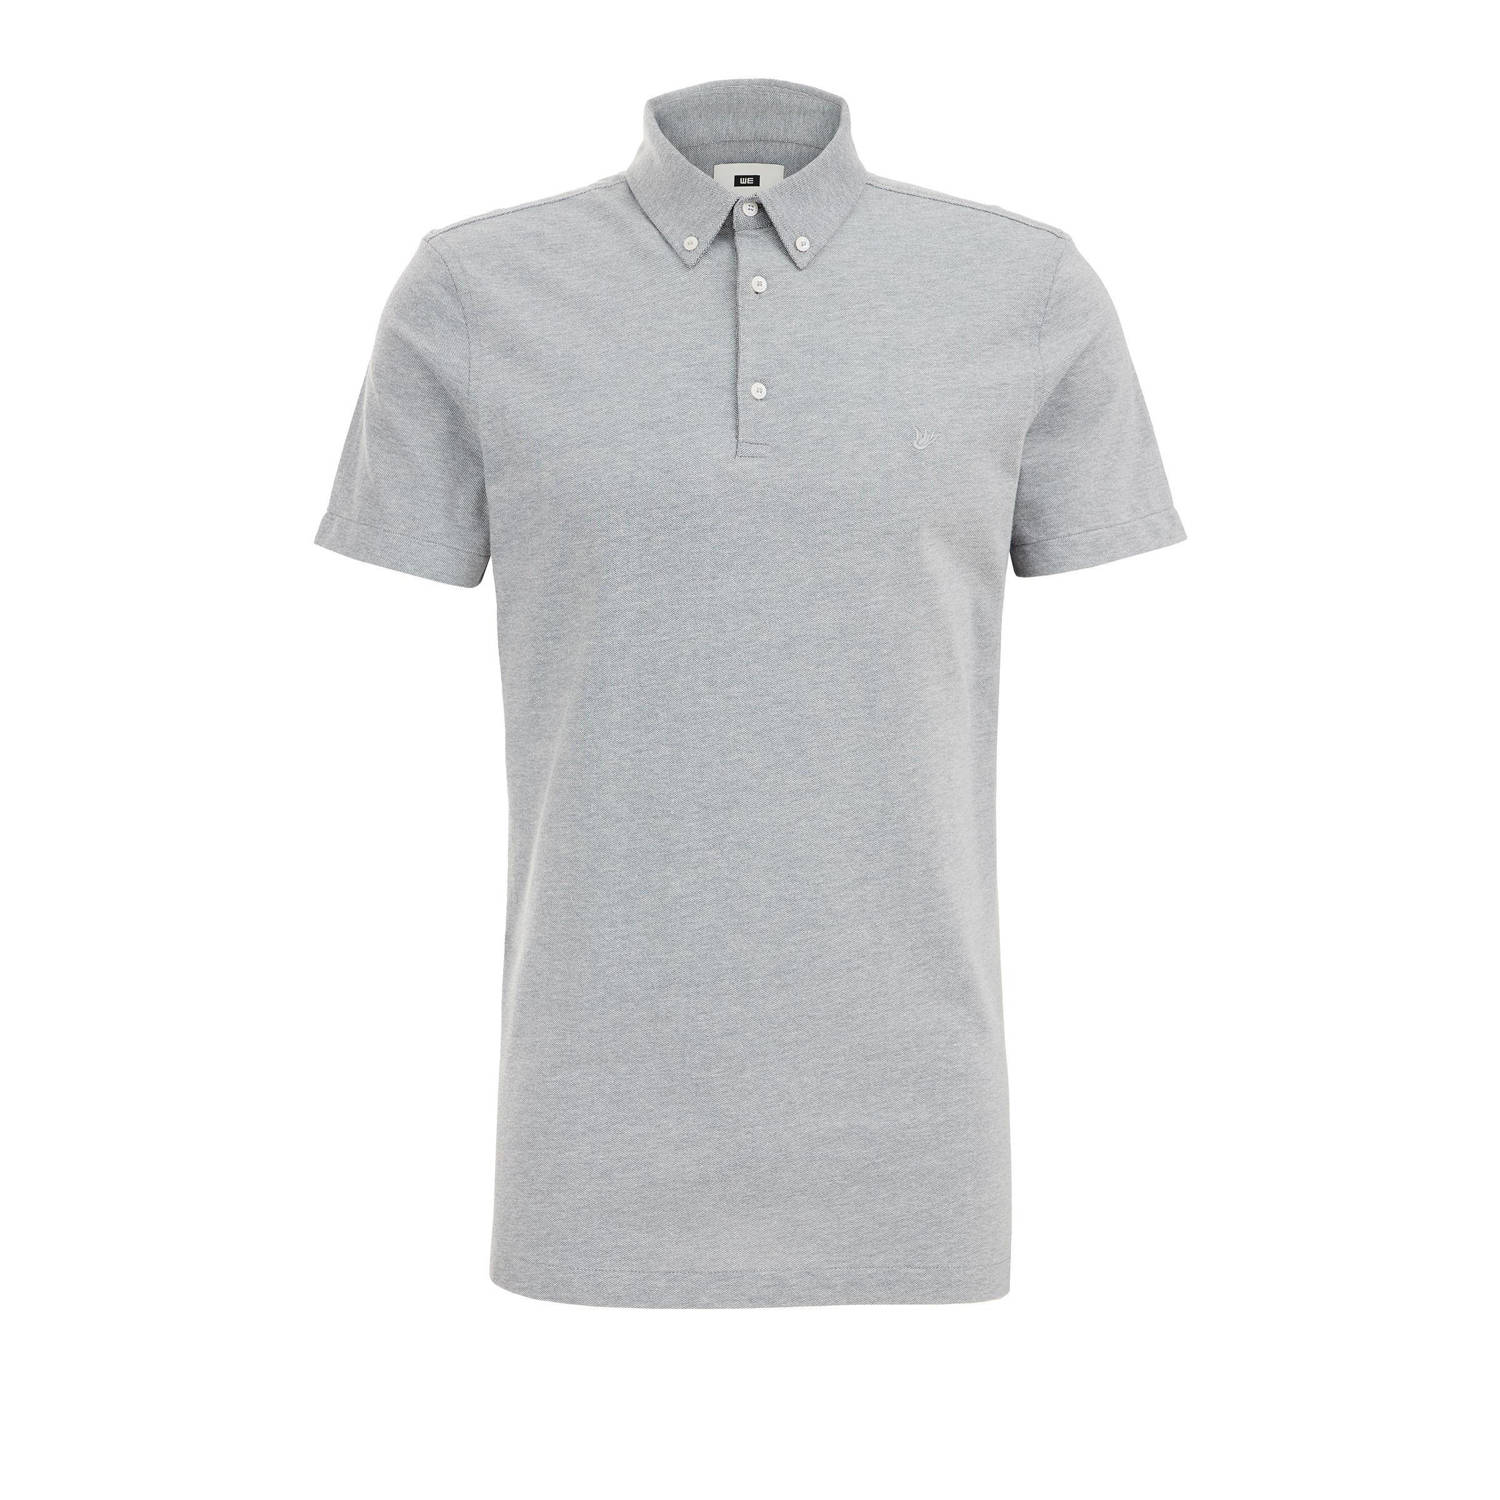 WE Fashion slim fit polo met logo mouse